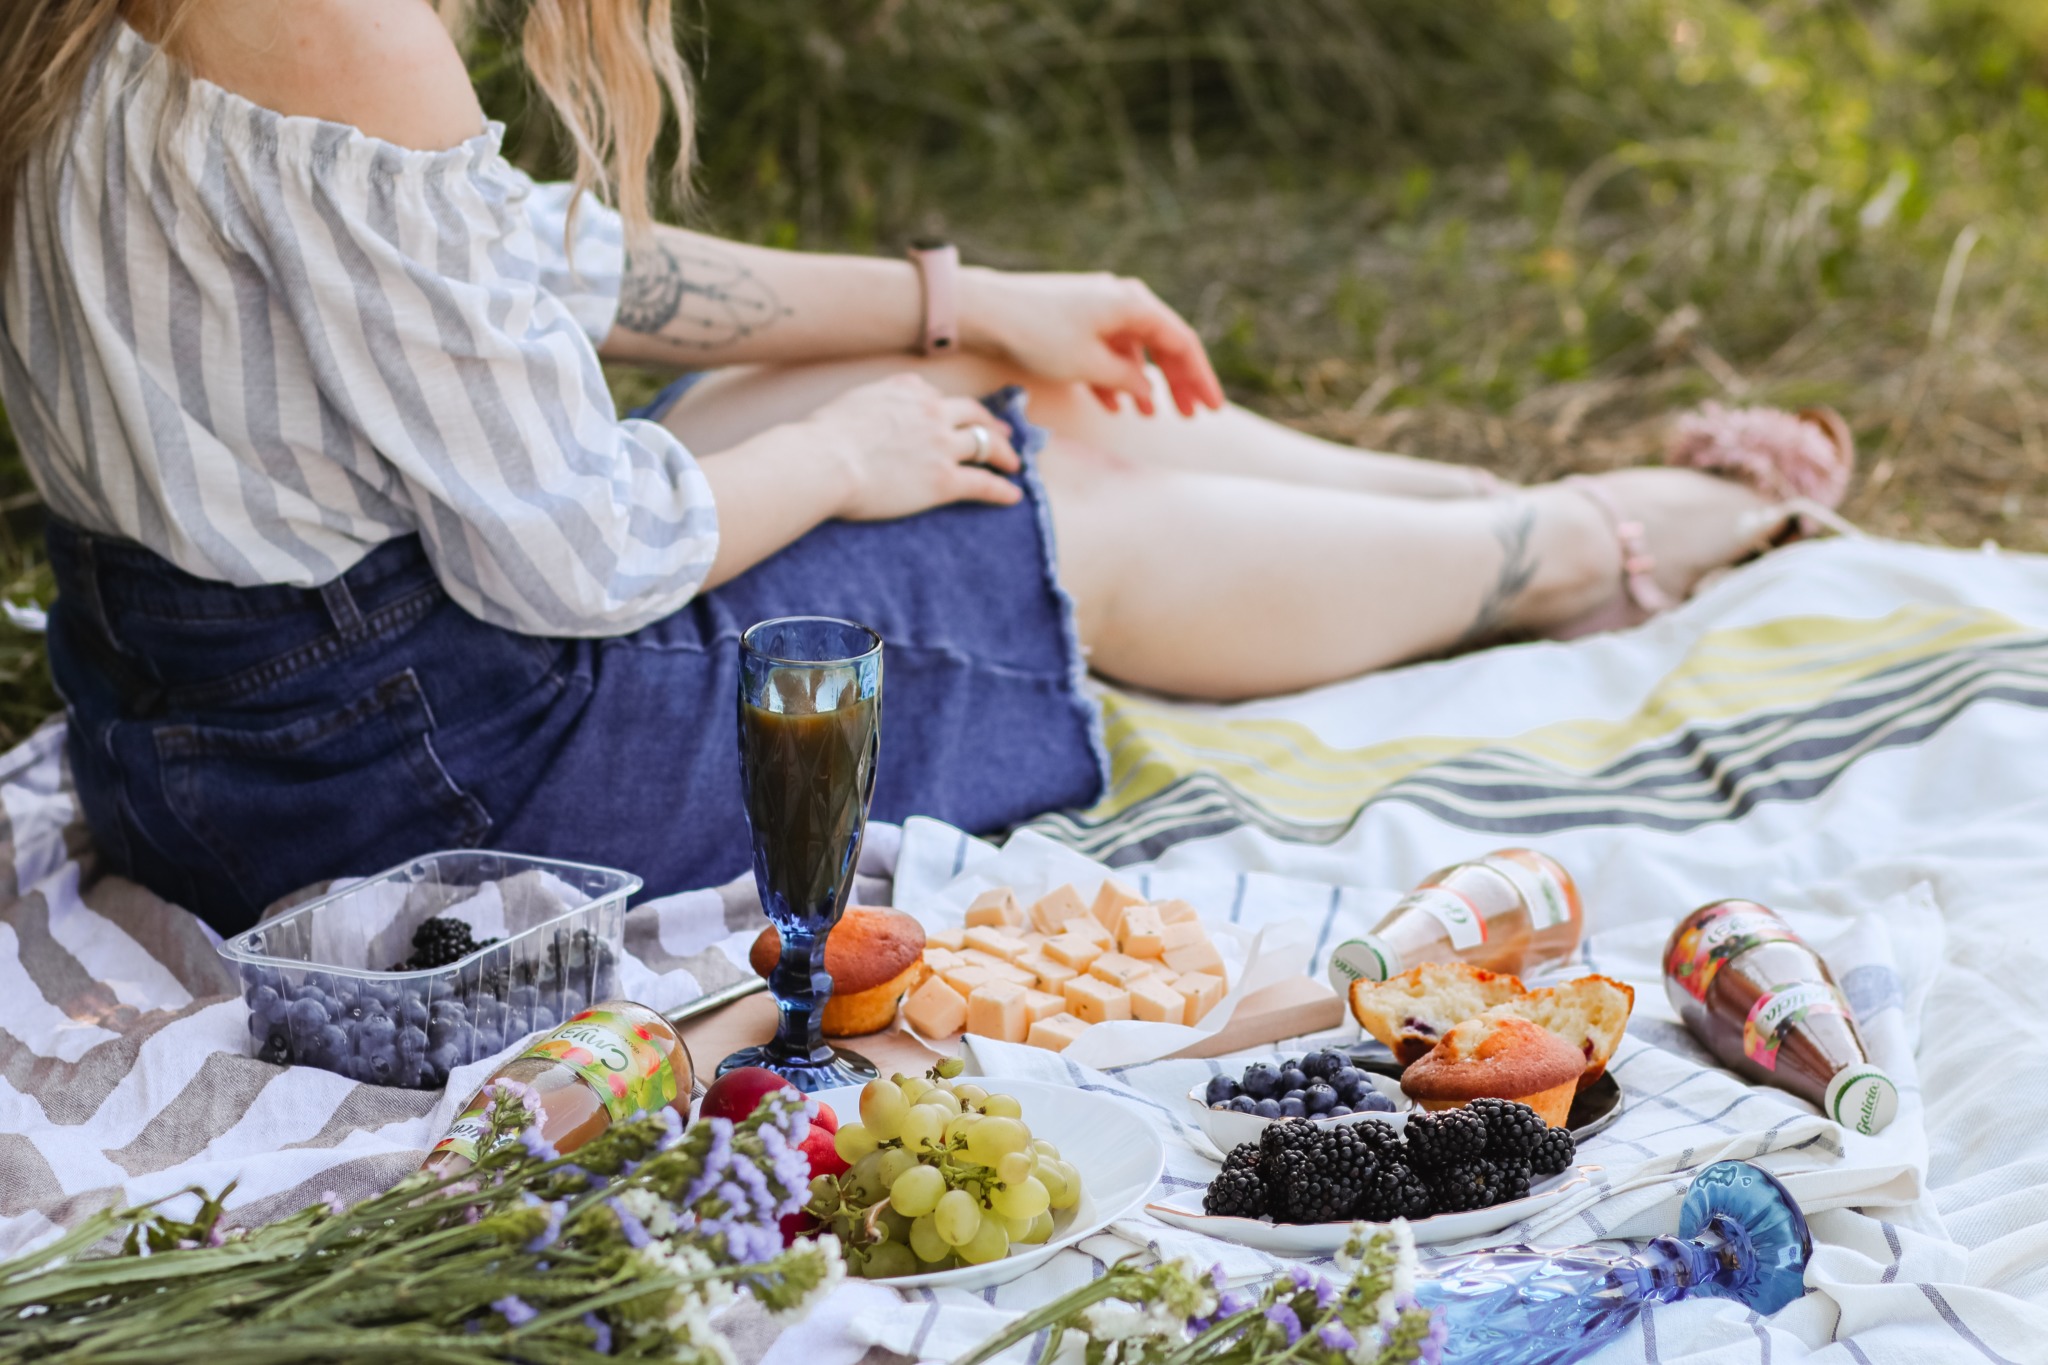 photo of a picnic laid out on a blanket with a woman sitting next to it